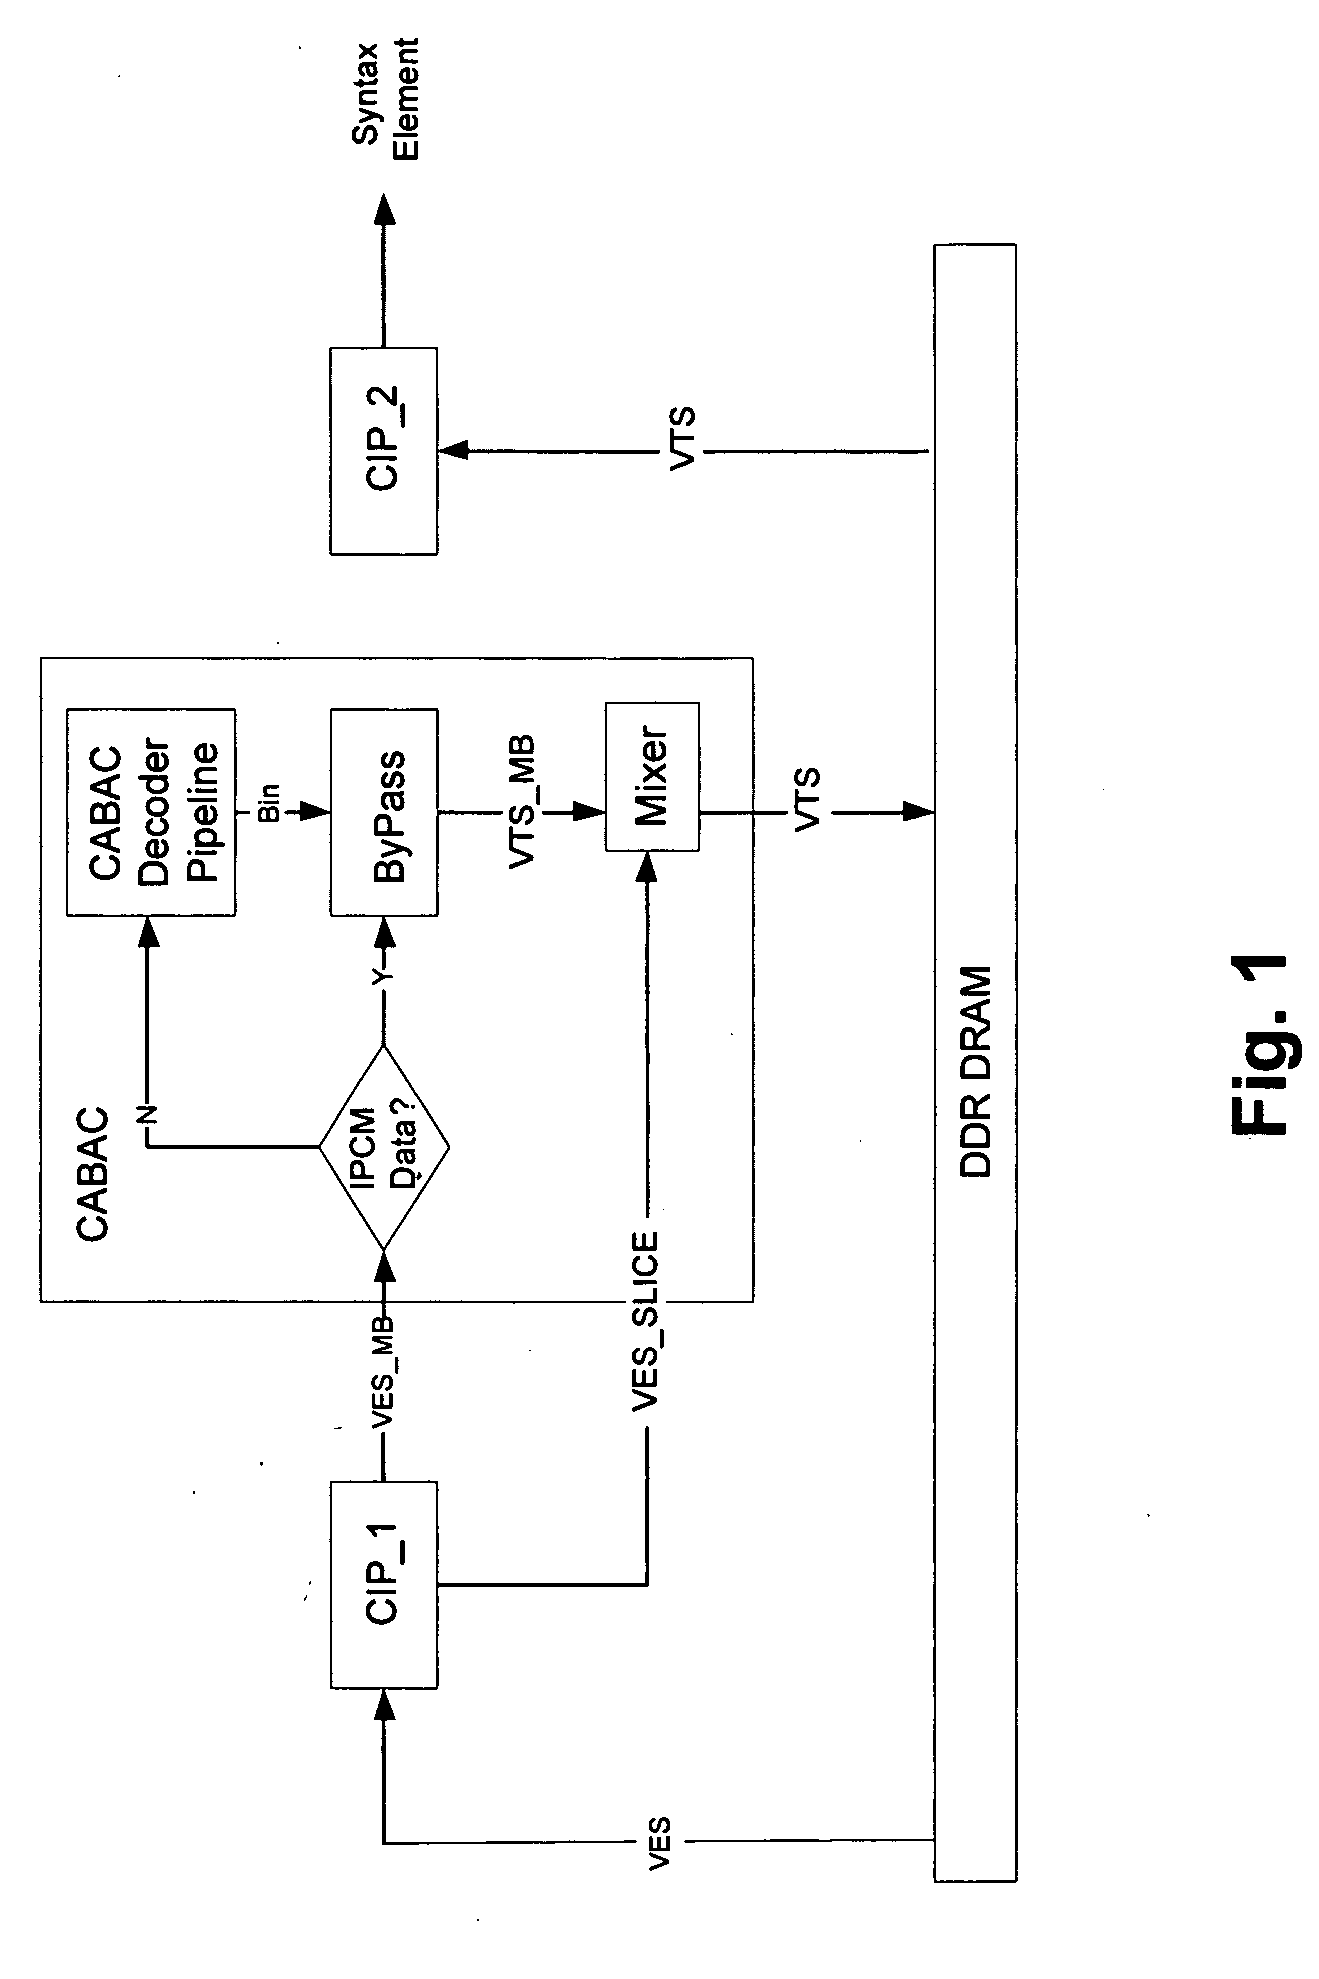 Two pass architecture for H.264 CABAC decoding process